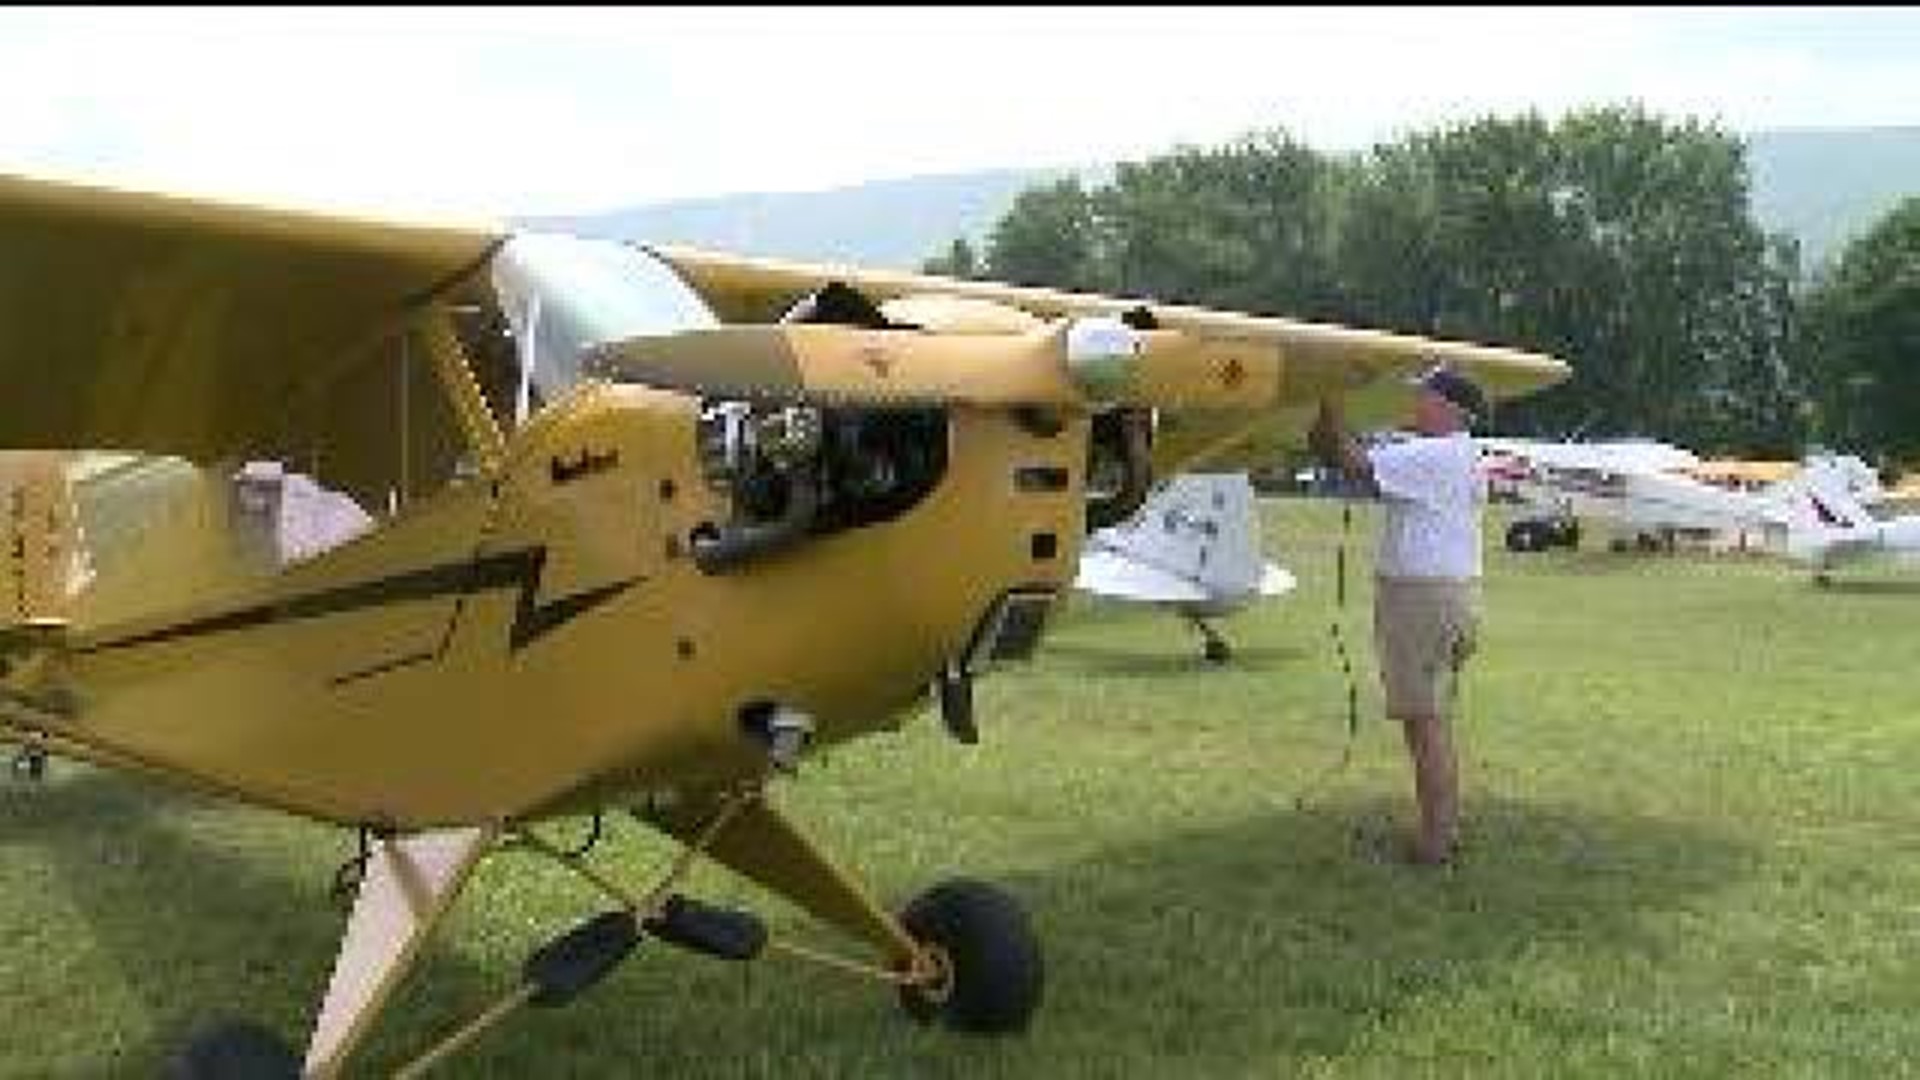 Lock Haven Plane May be Named Official State Aircraft